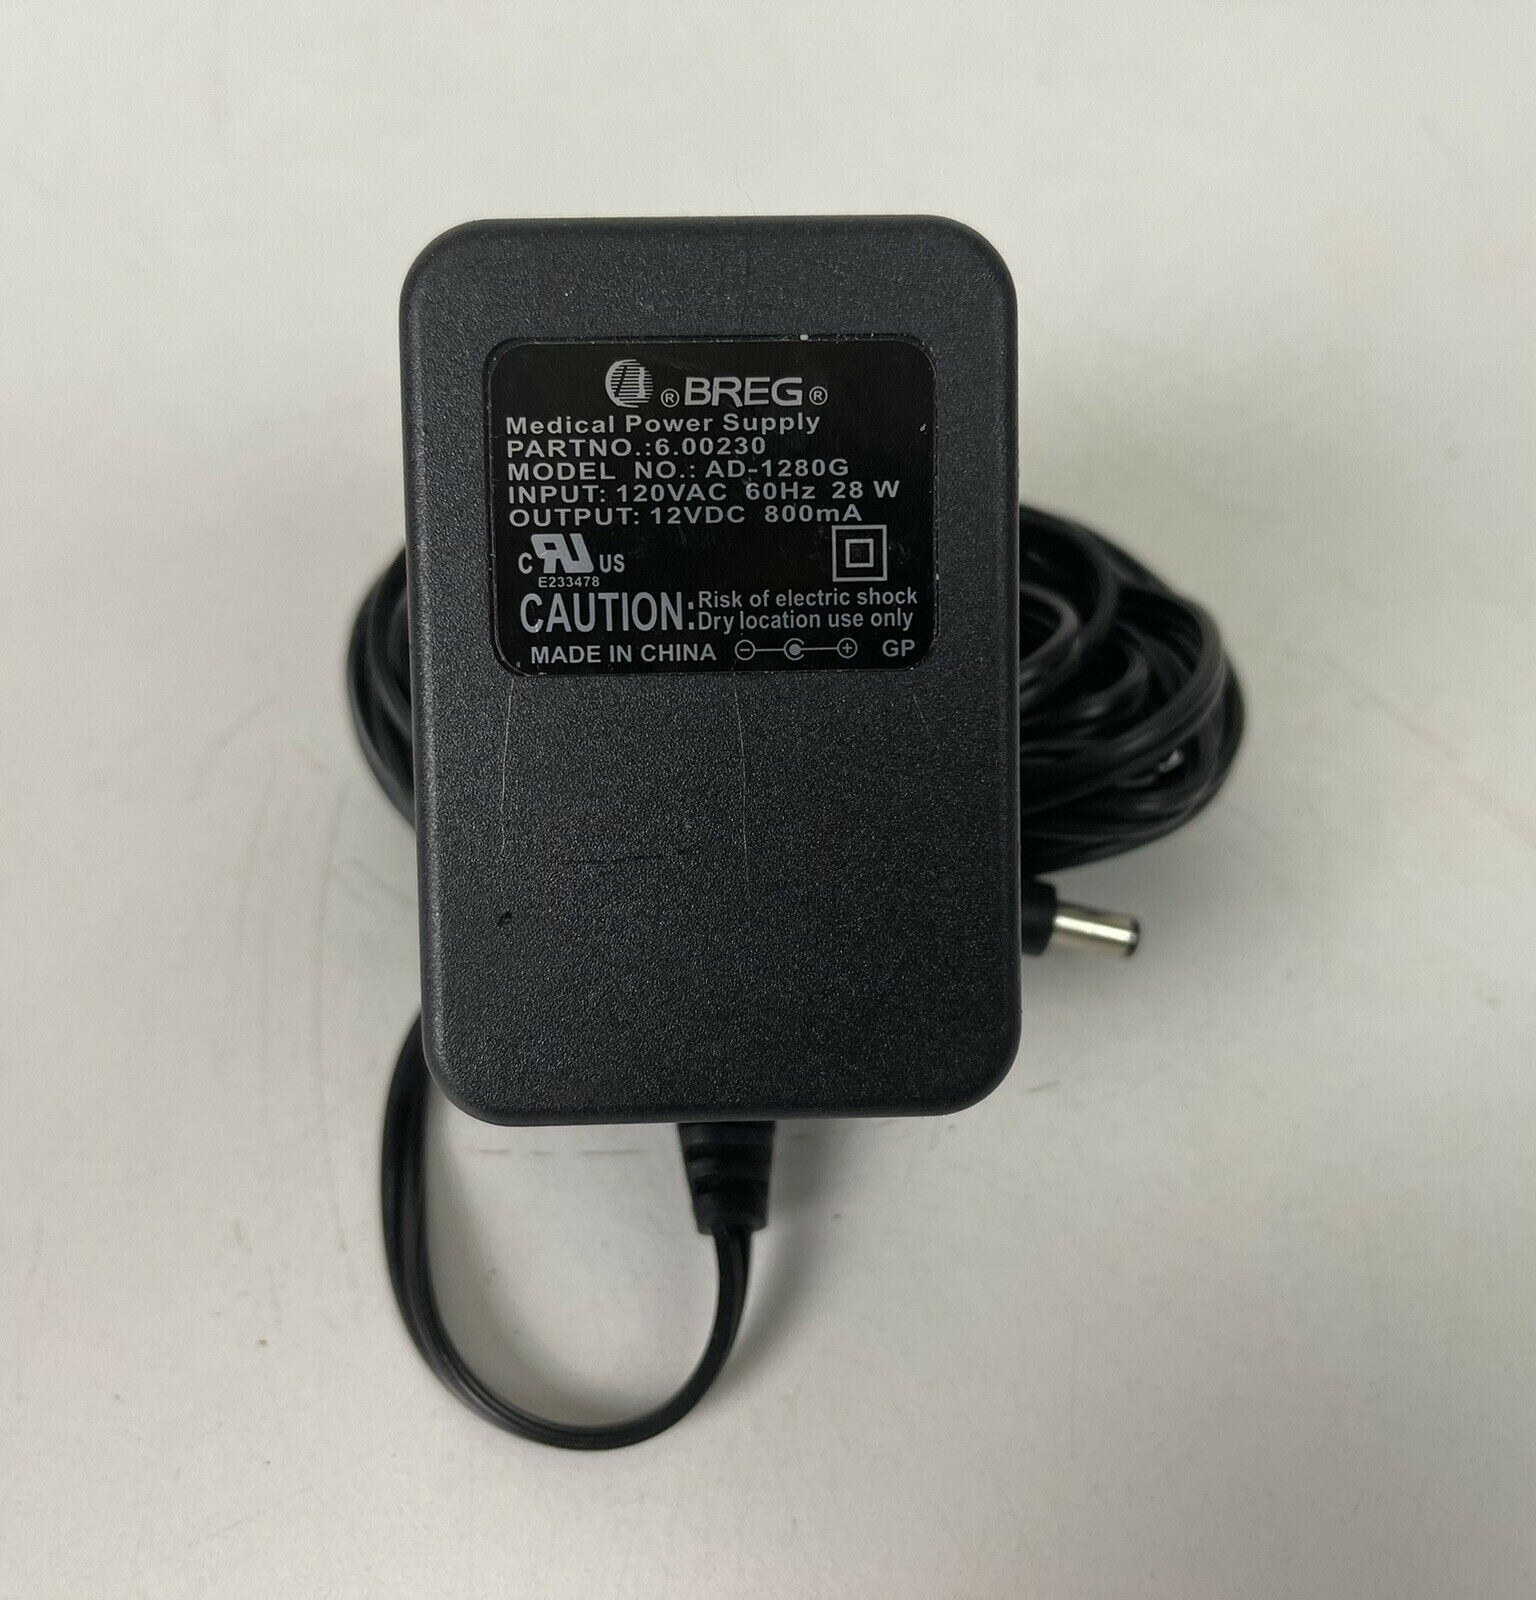 Genuine OEM Breg AD-1280G Polar Care System Power Supply Adapter 12V DC 800mA Brand: Breg Type: AC/DC Adapter Conne - Click Image to Close